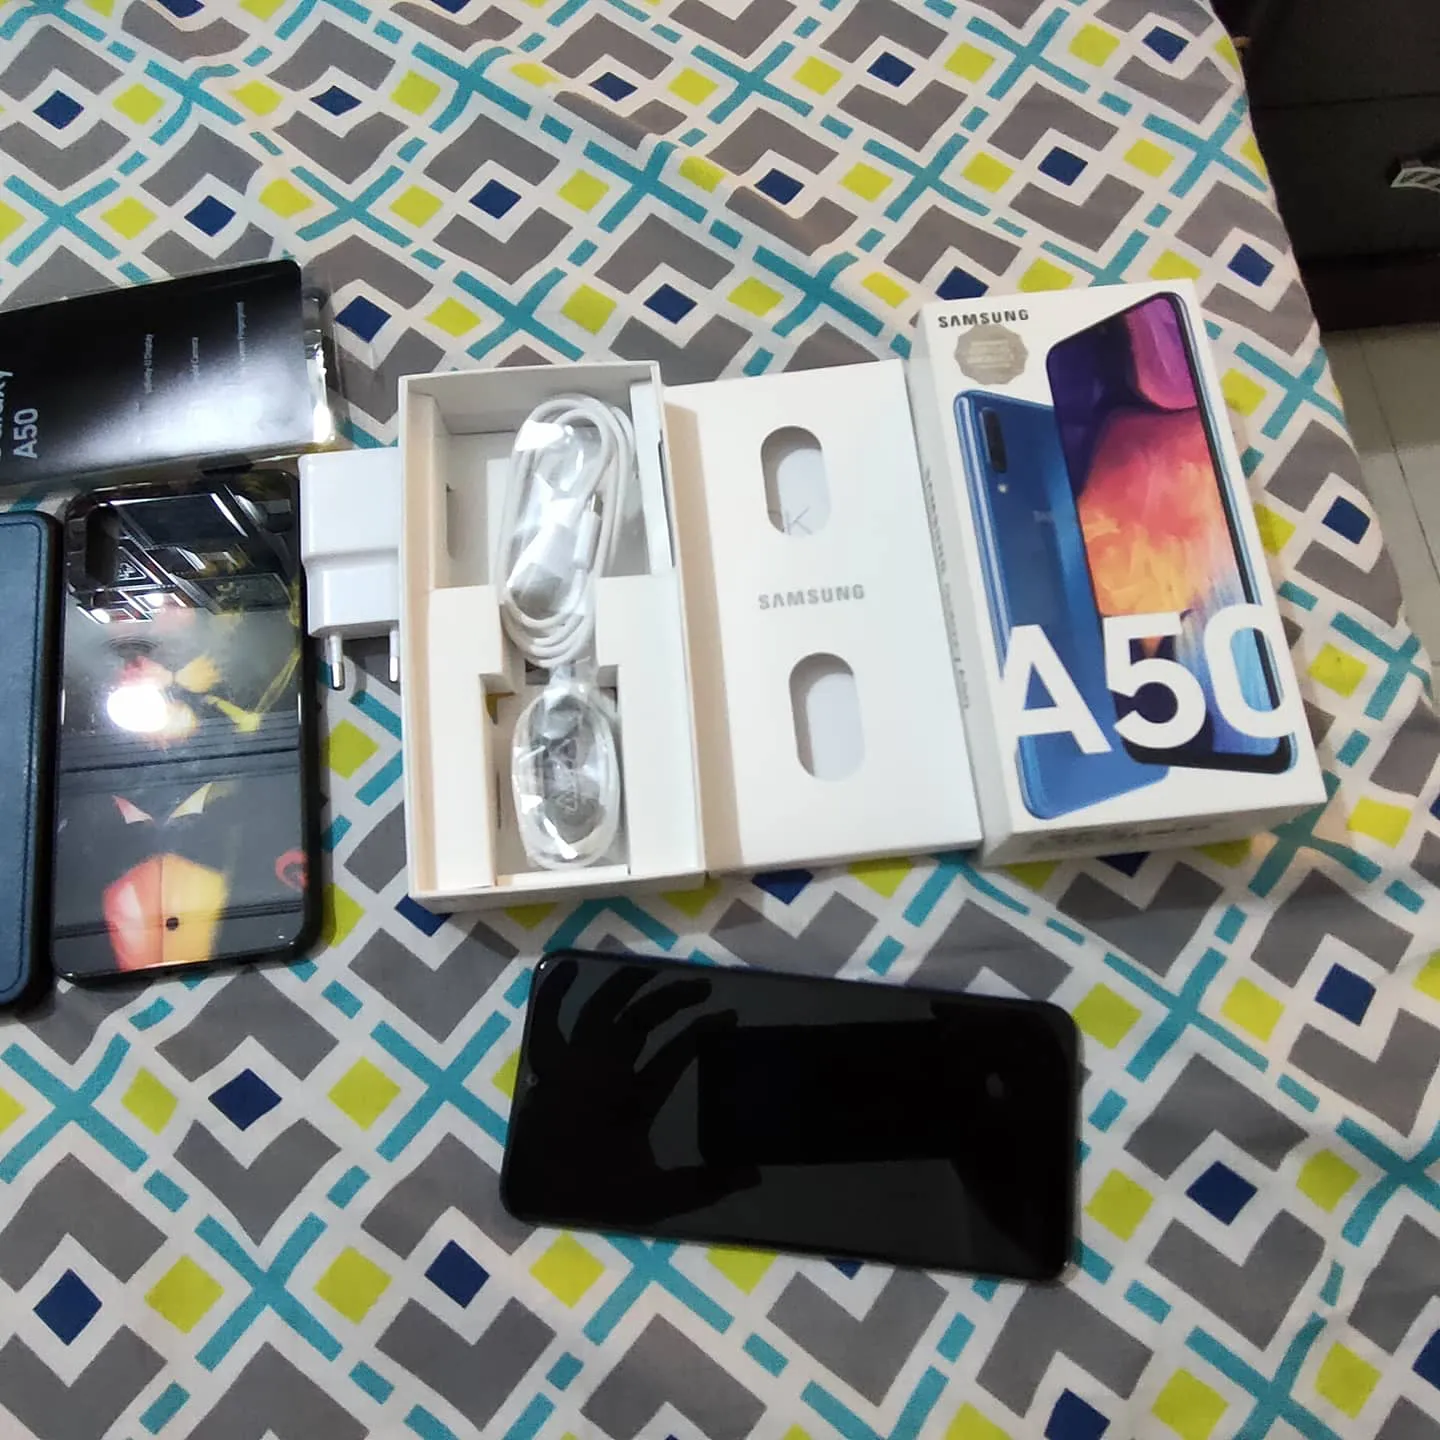 Samsung A50 (Like new condition) - photo 1